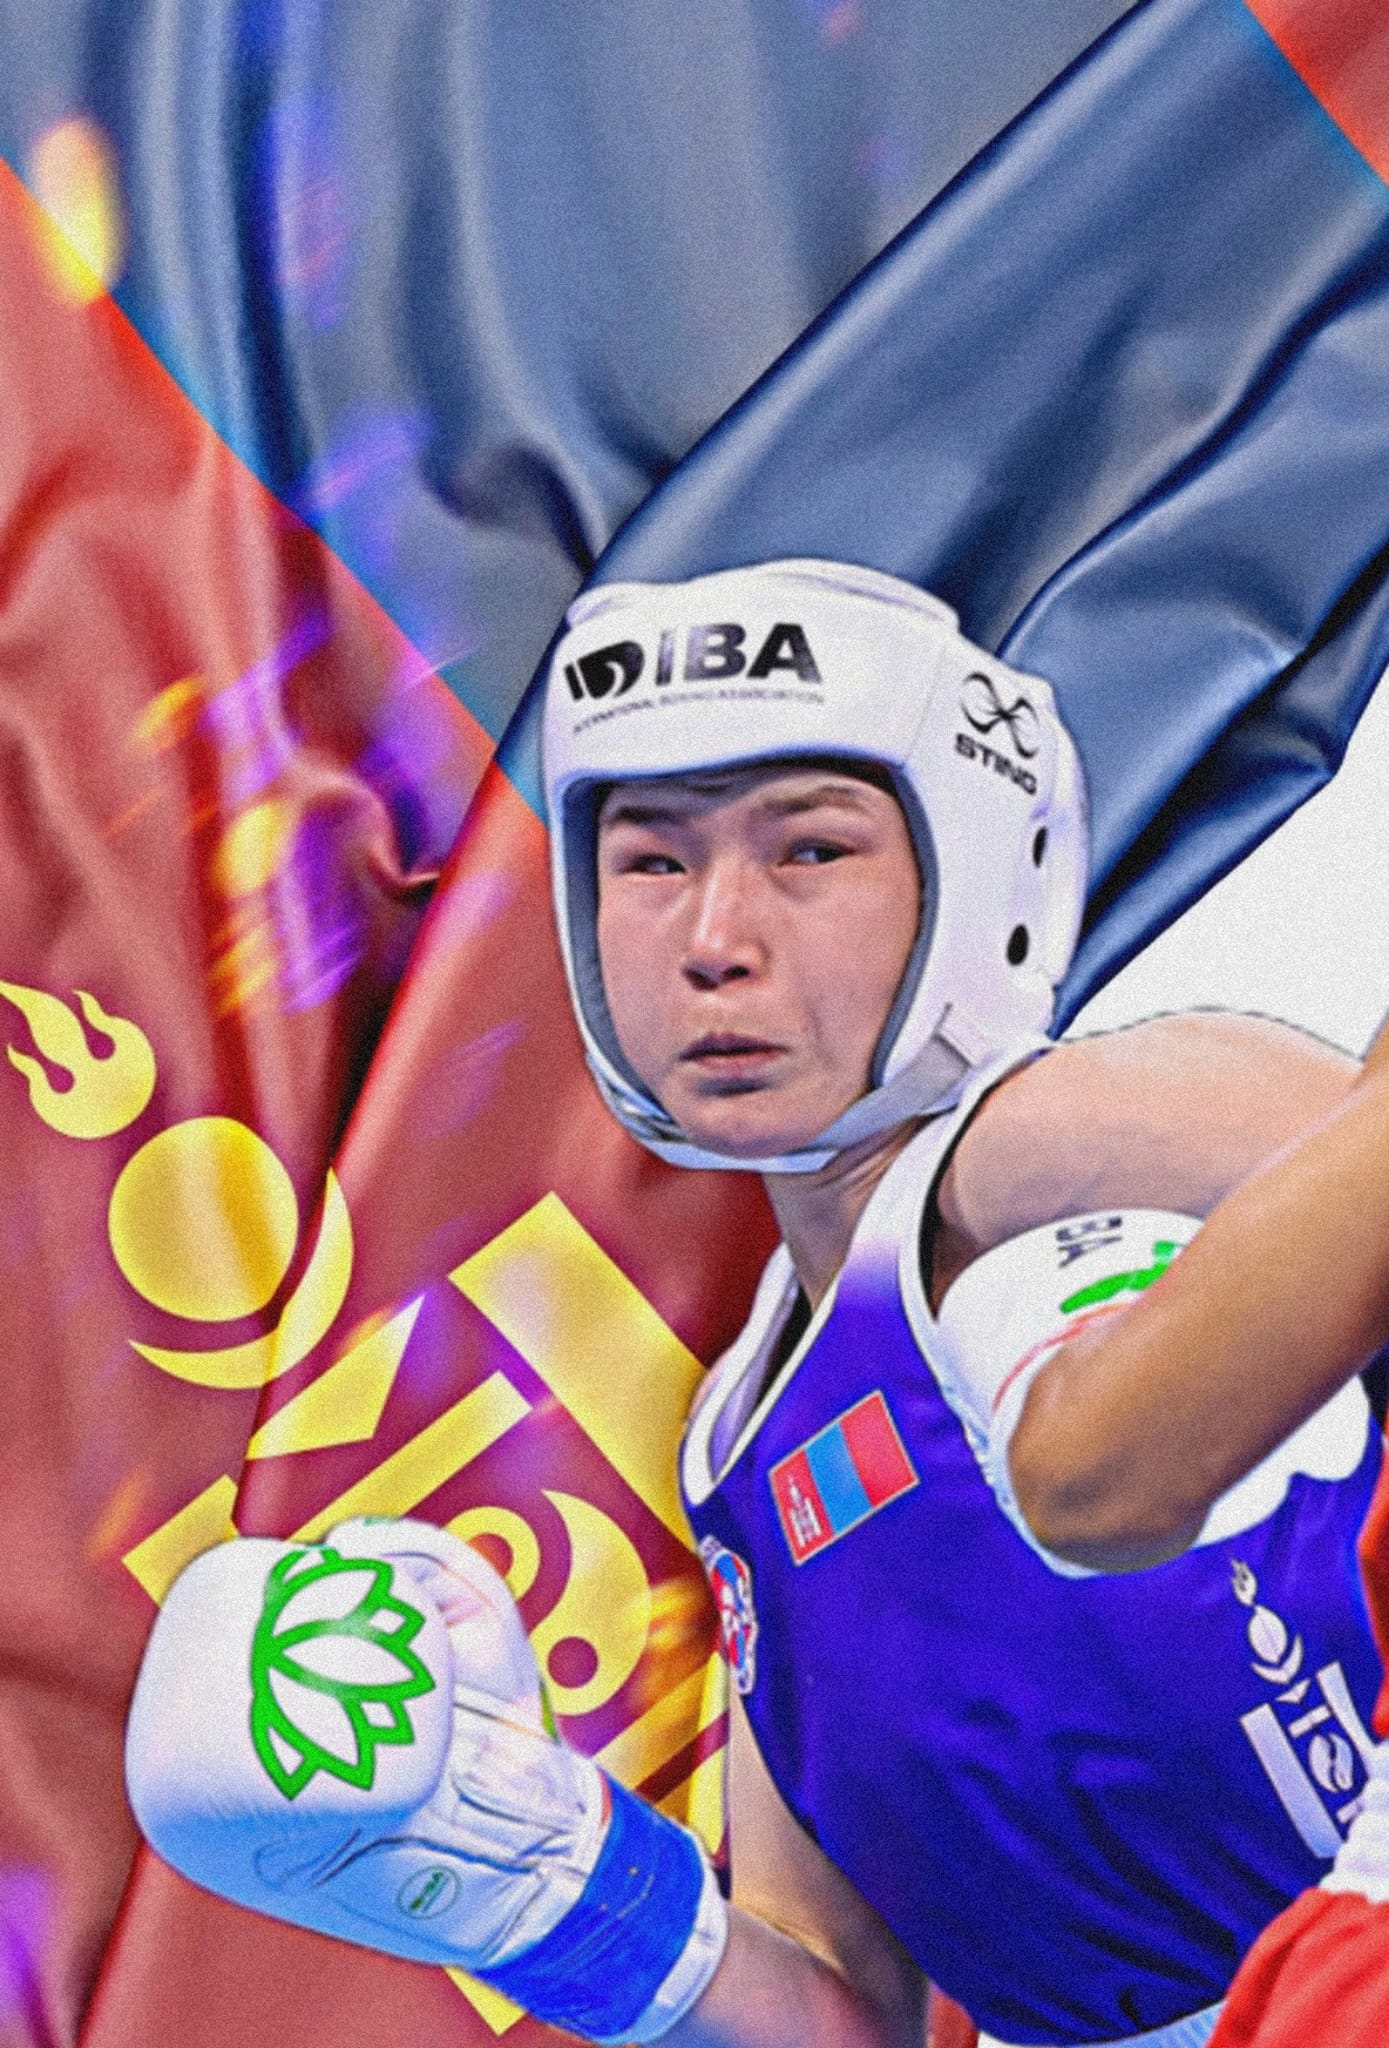 There remains uncertainty over whether Mongolia has joined World Boxing, with IBA claiming they remain committed to them ©Mongolian Boxing Federation